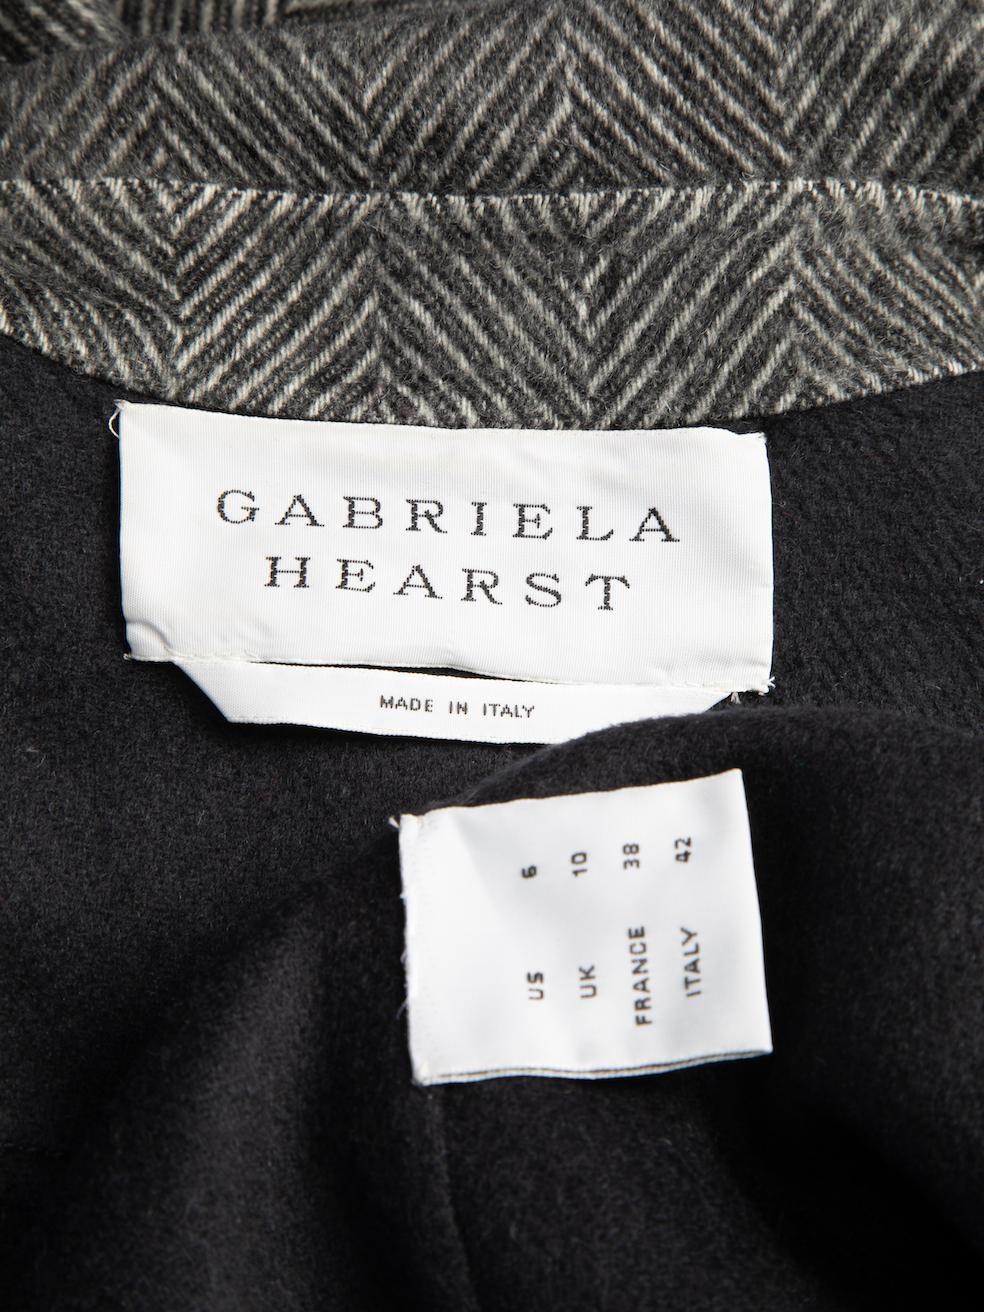 Pre-Loved Gabriela Hearst Women's Belted Cashmere Reversible Coat 1